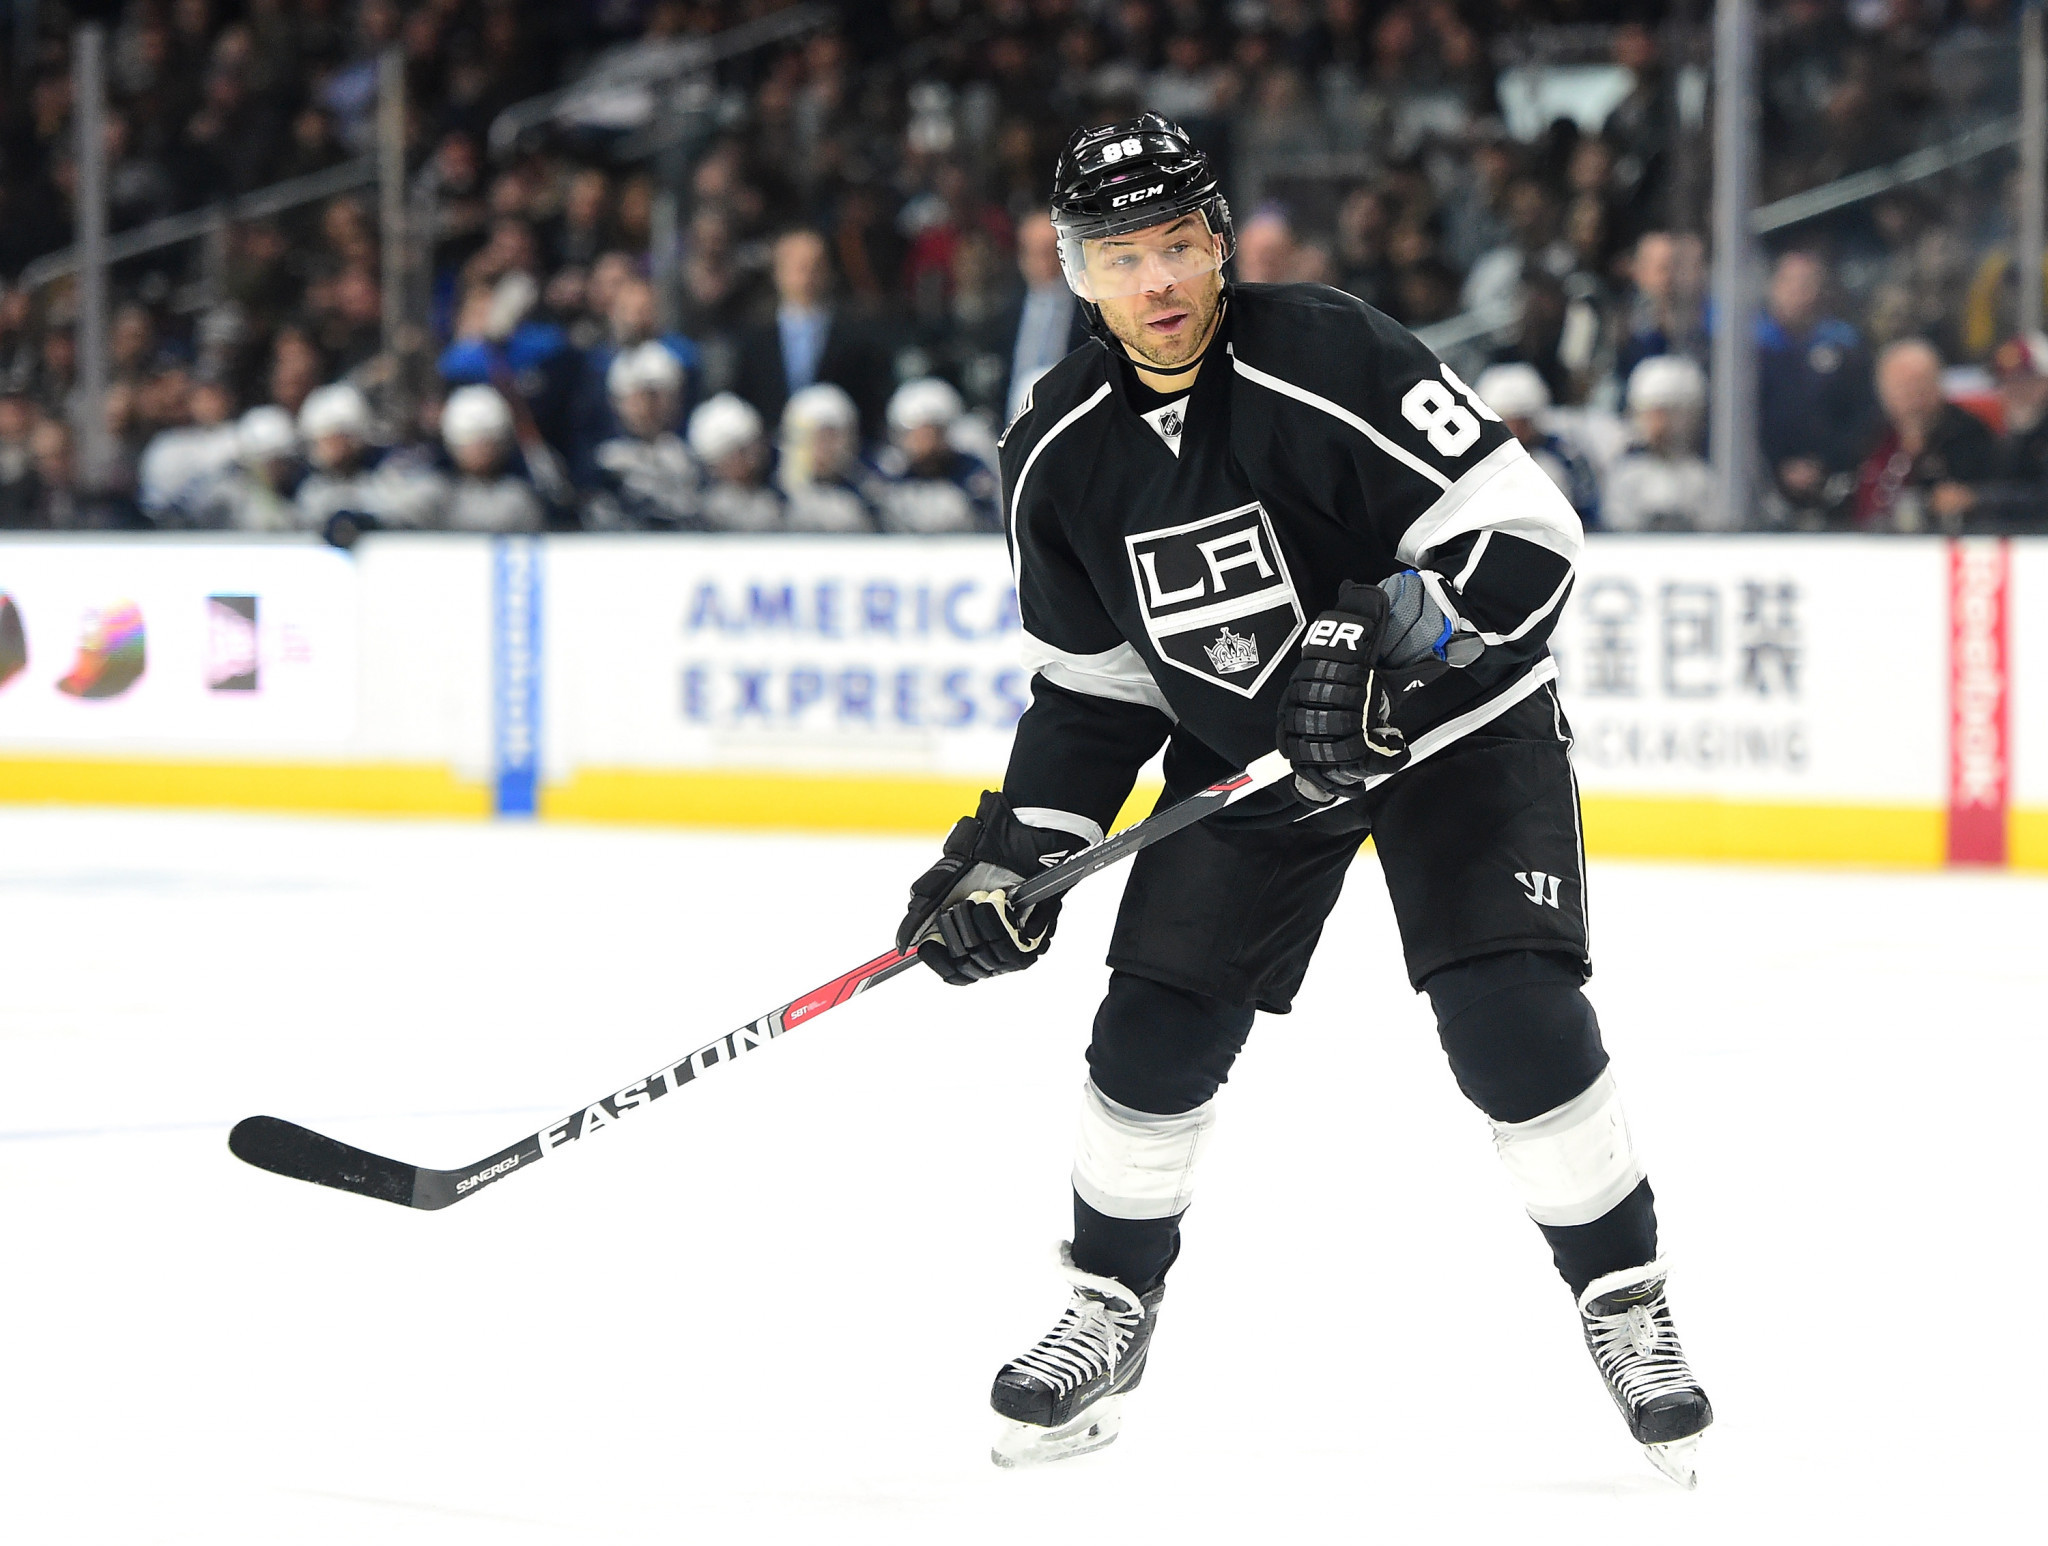 Ice hockey great Iginla inducted into 2020 Hockey Hall of Fame